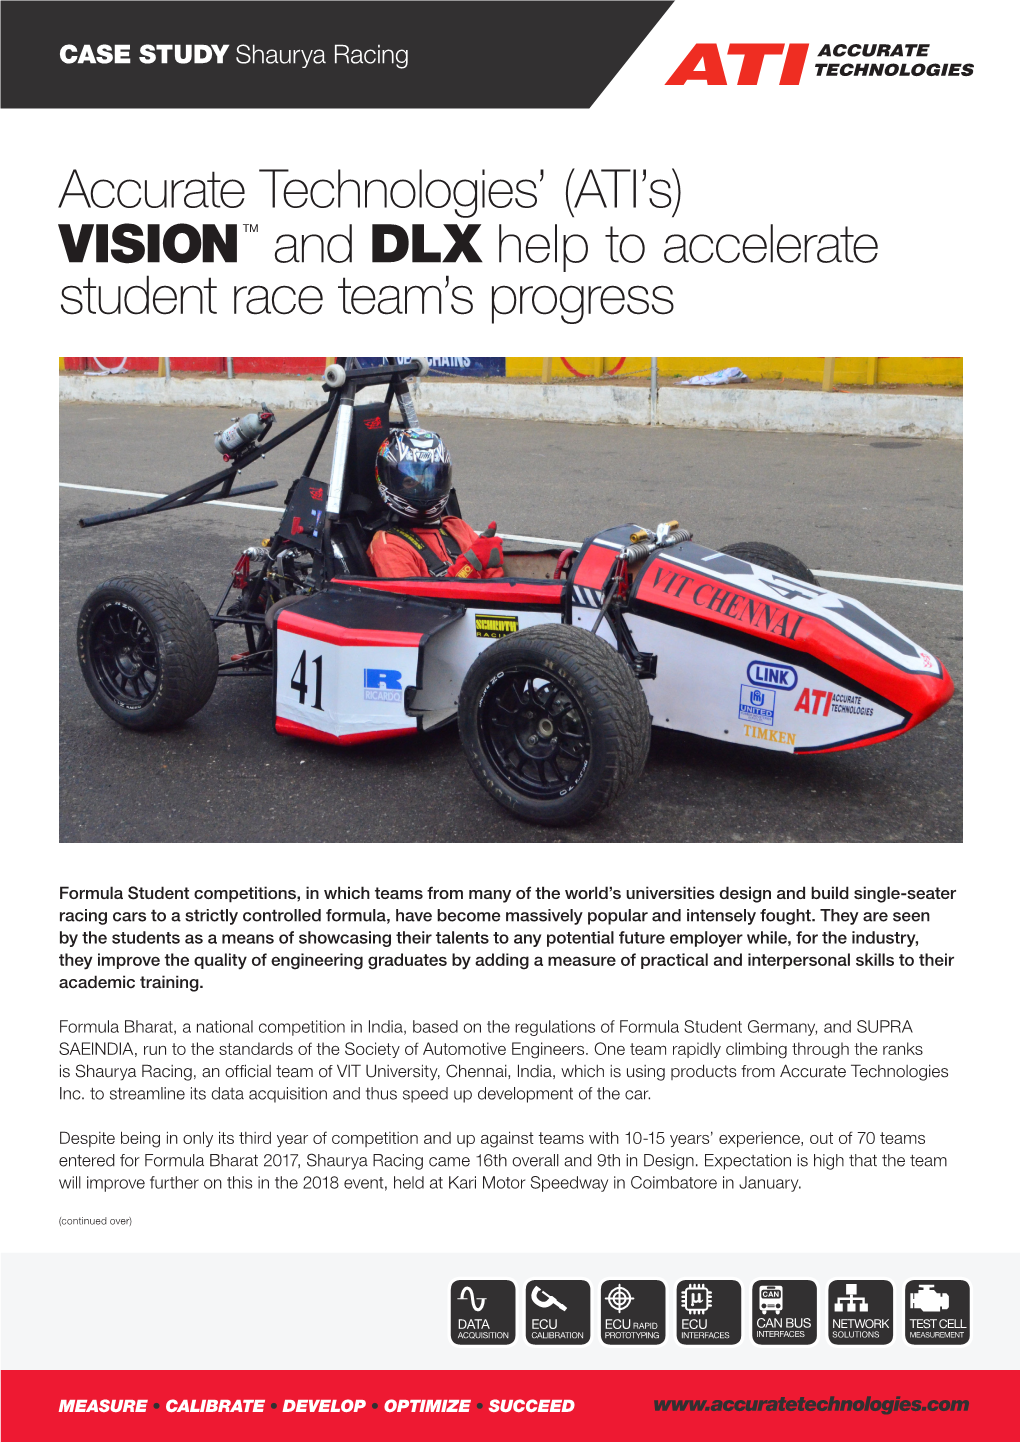 (ATI's) VISION TM and DLX Help to Accelerate Student Race Team's